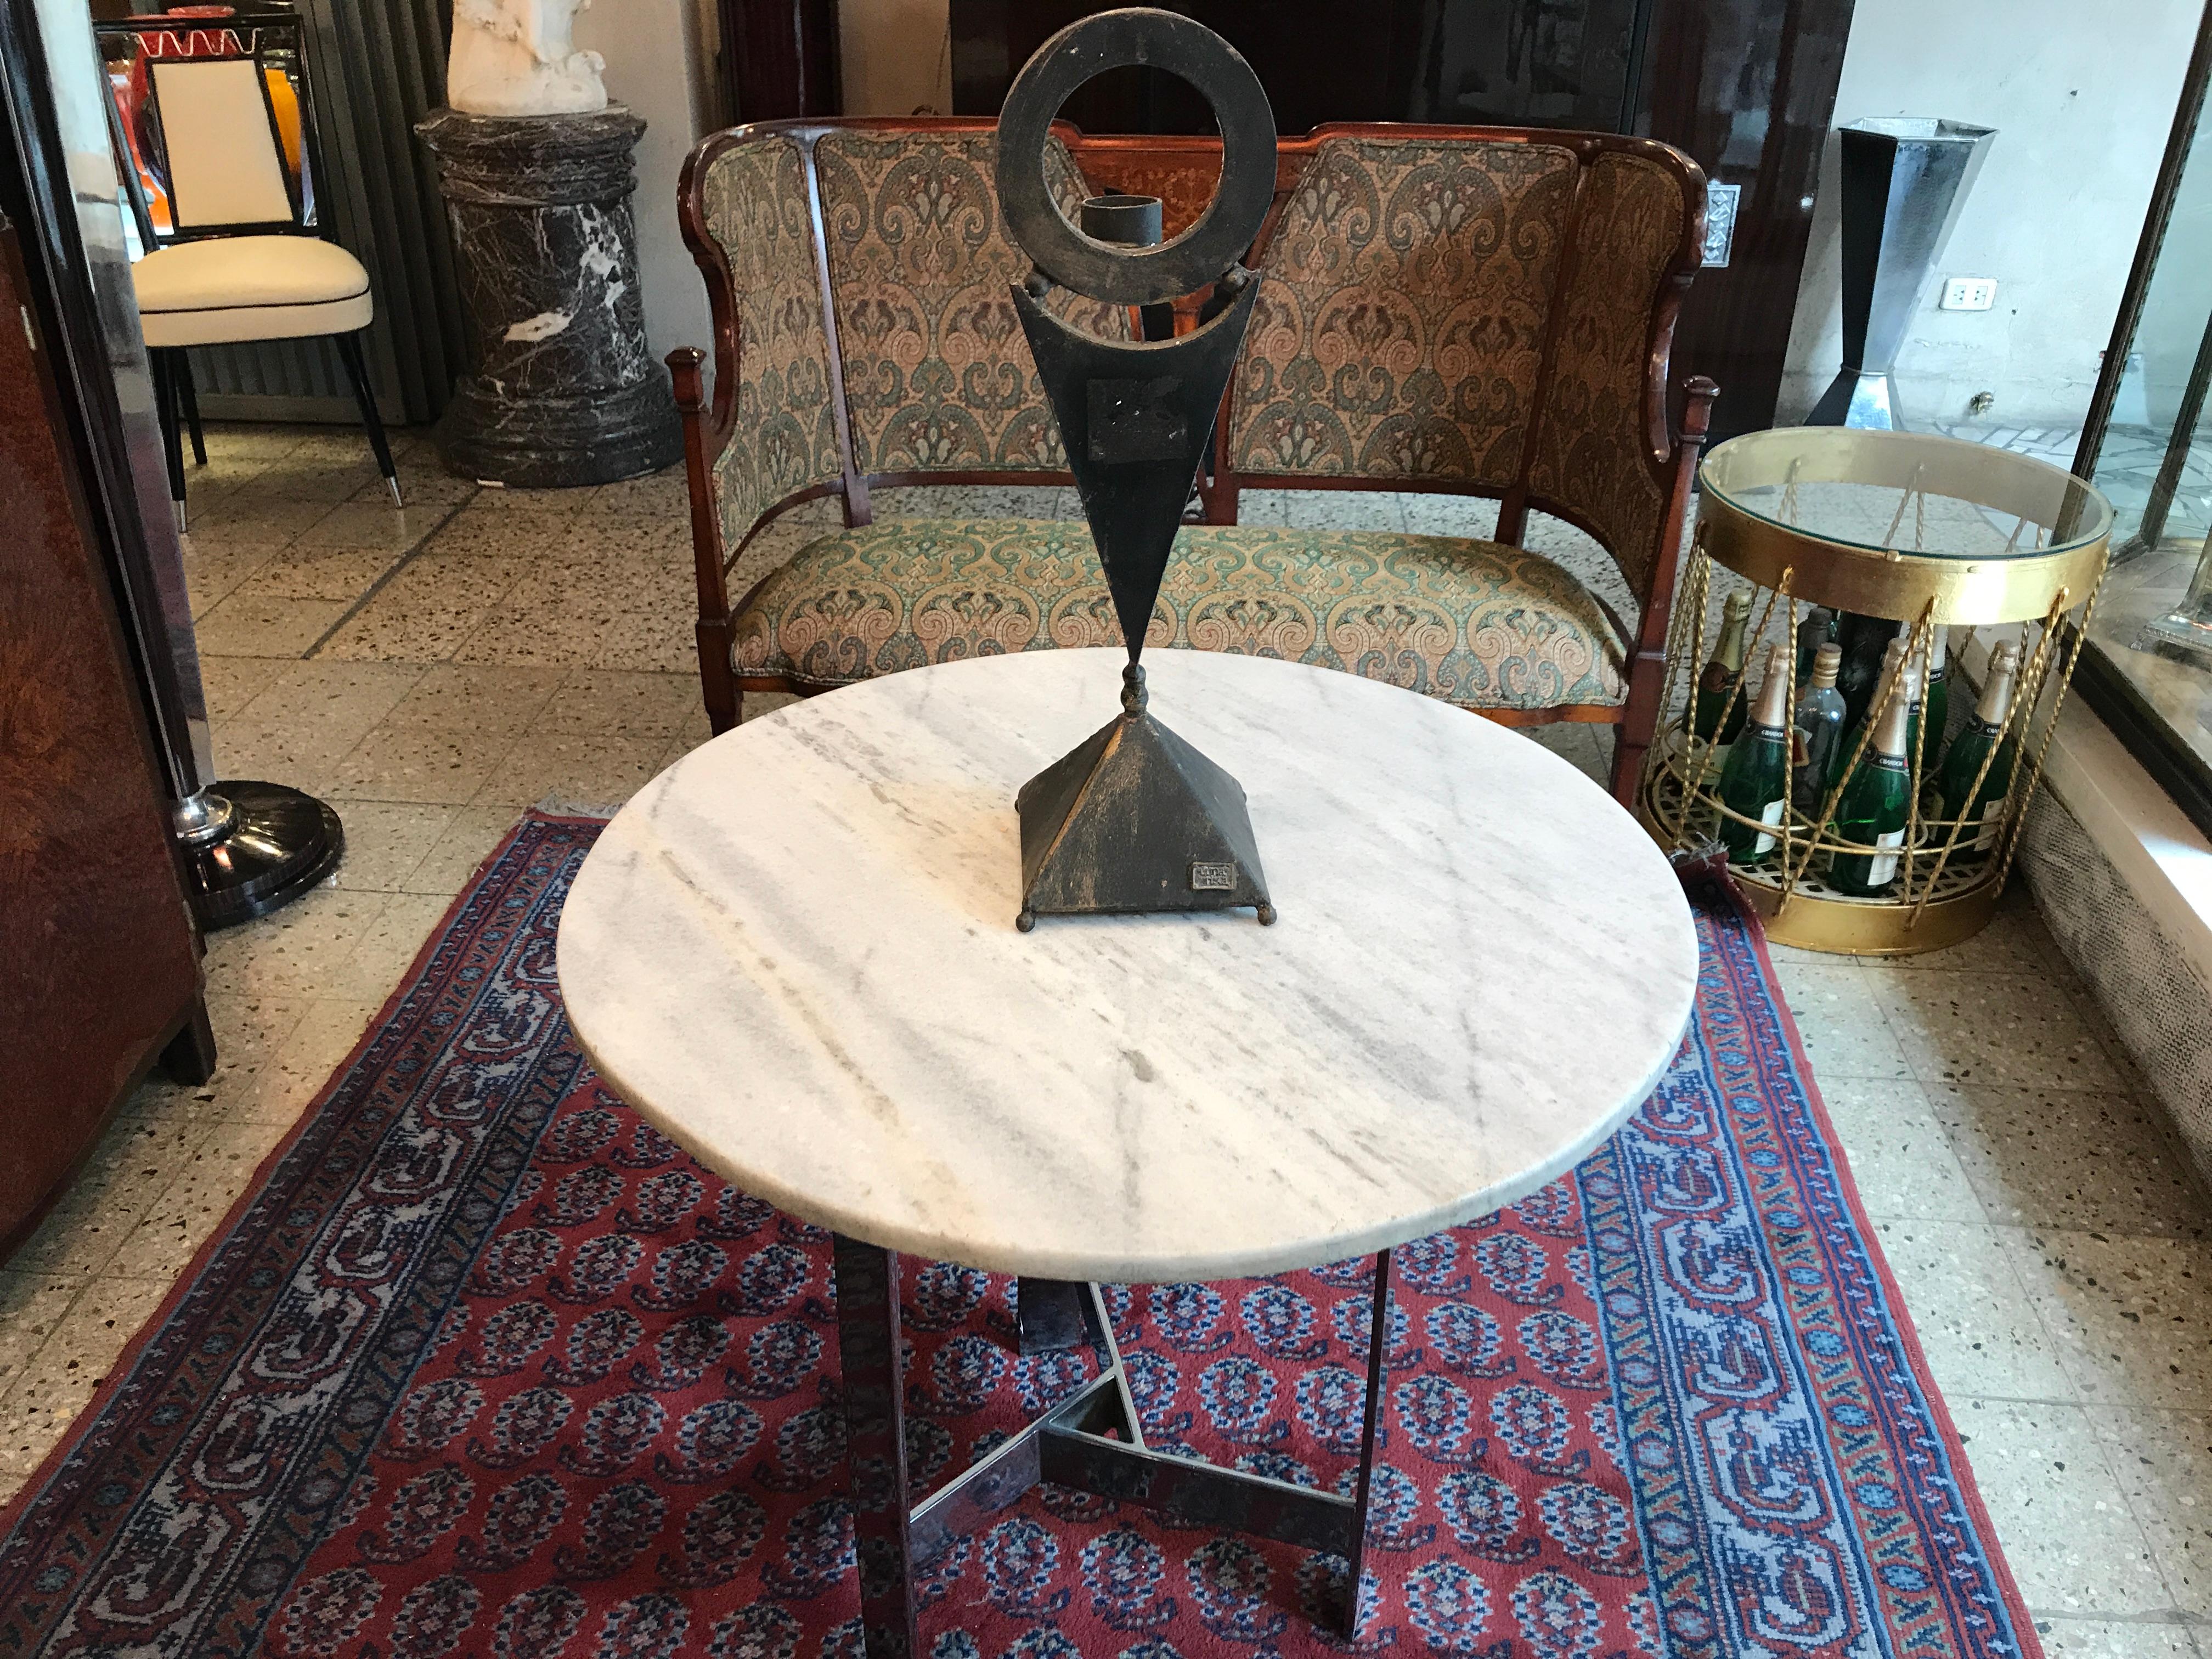 Candelabra

We have specialized in the sale of Art Deco and Art Nouveau and Vintage styles since 1982. If you have any questions we are at your disposal.
Pushing the button that reads 'View All From Seller'. And you can see more objects to the